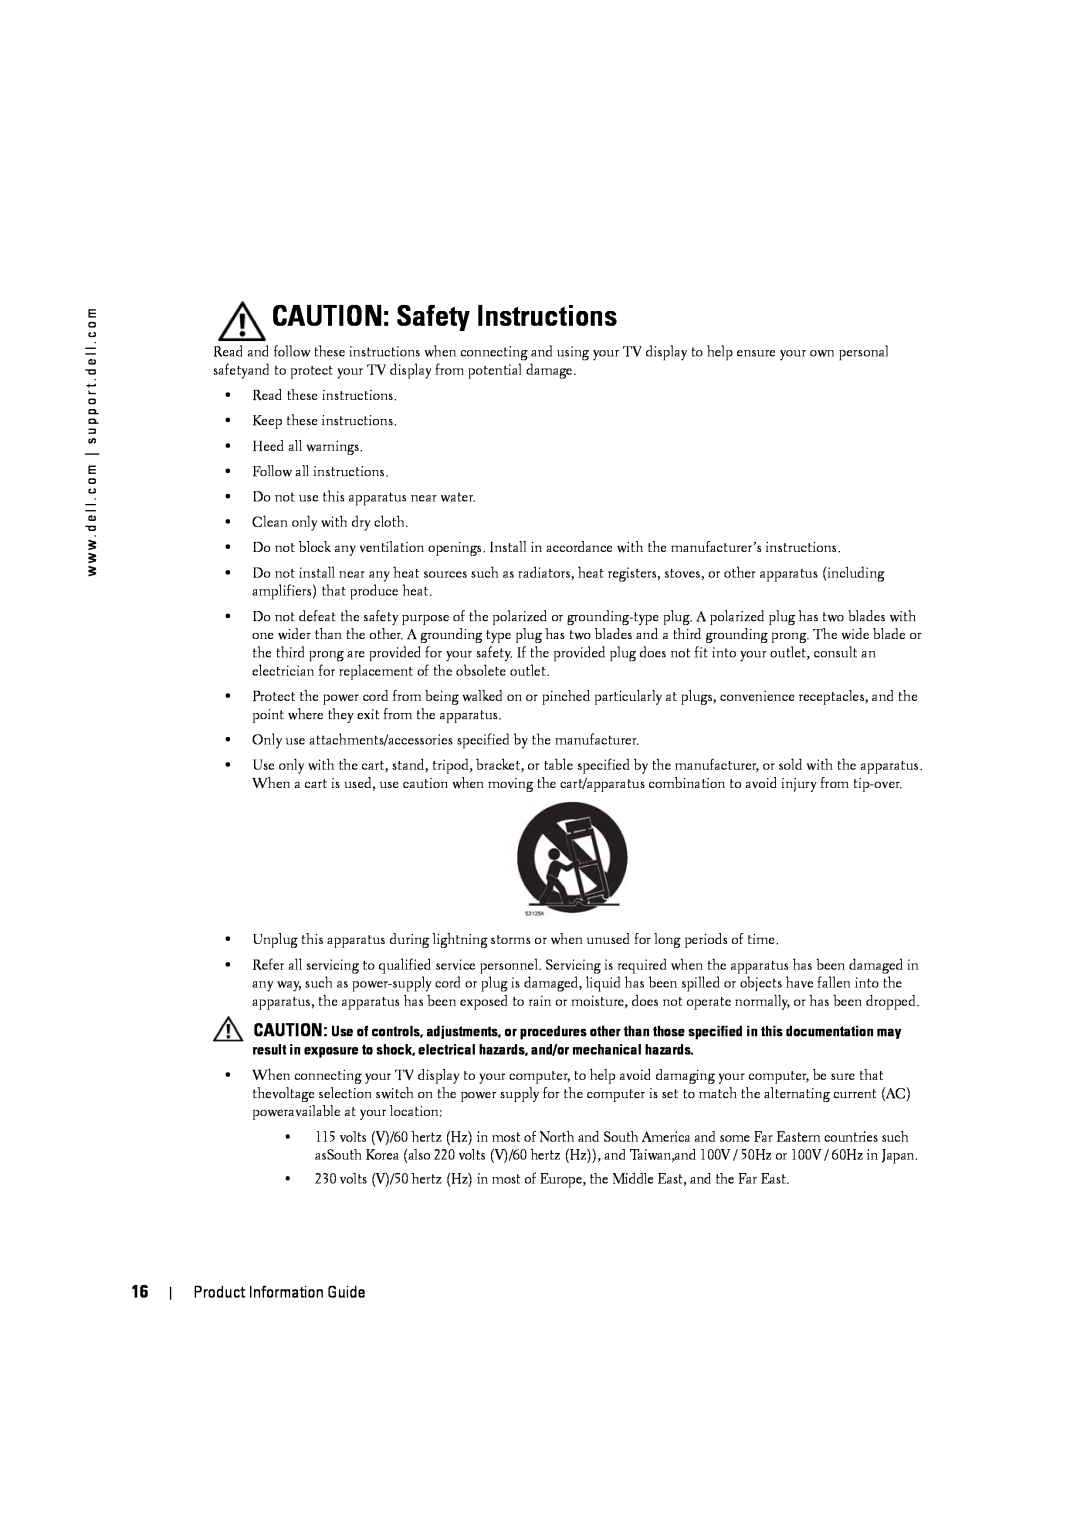 Dell W3201C, W4201C, W5001C manual CAUTION Safety Instructions, Product Information Guide 